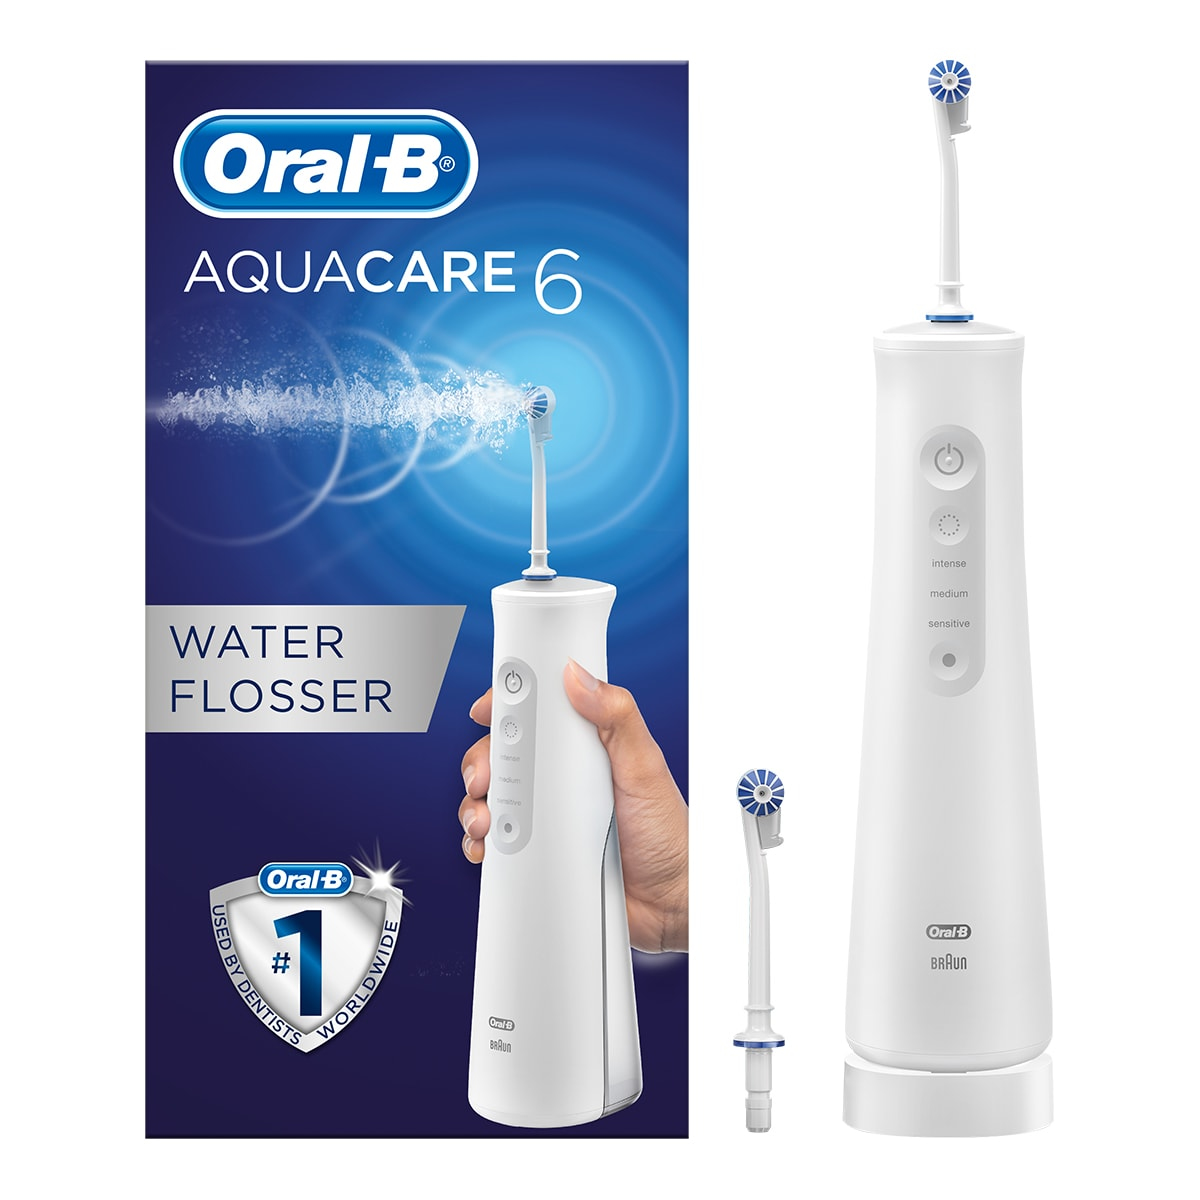 Oral-B AquaCare 6 Pro-Expert oral irrigator, 2 replacement nozzles, interdental cleaner with 6 cleaning modes for gentle dental care and healthy gums, Designed by Braun, white/grey Bunt Single